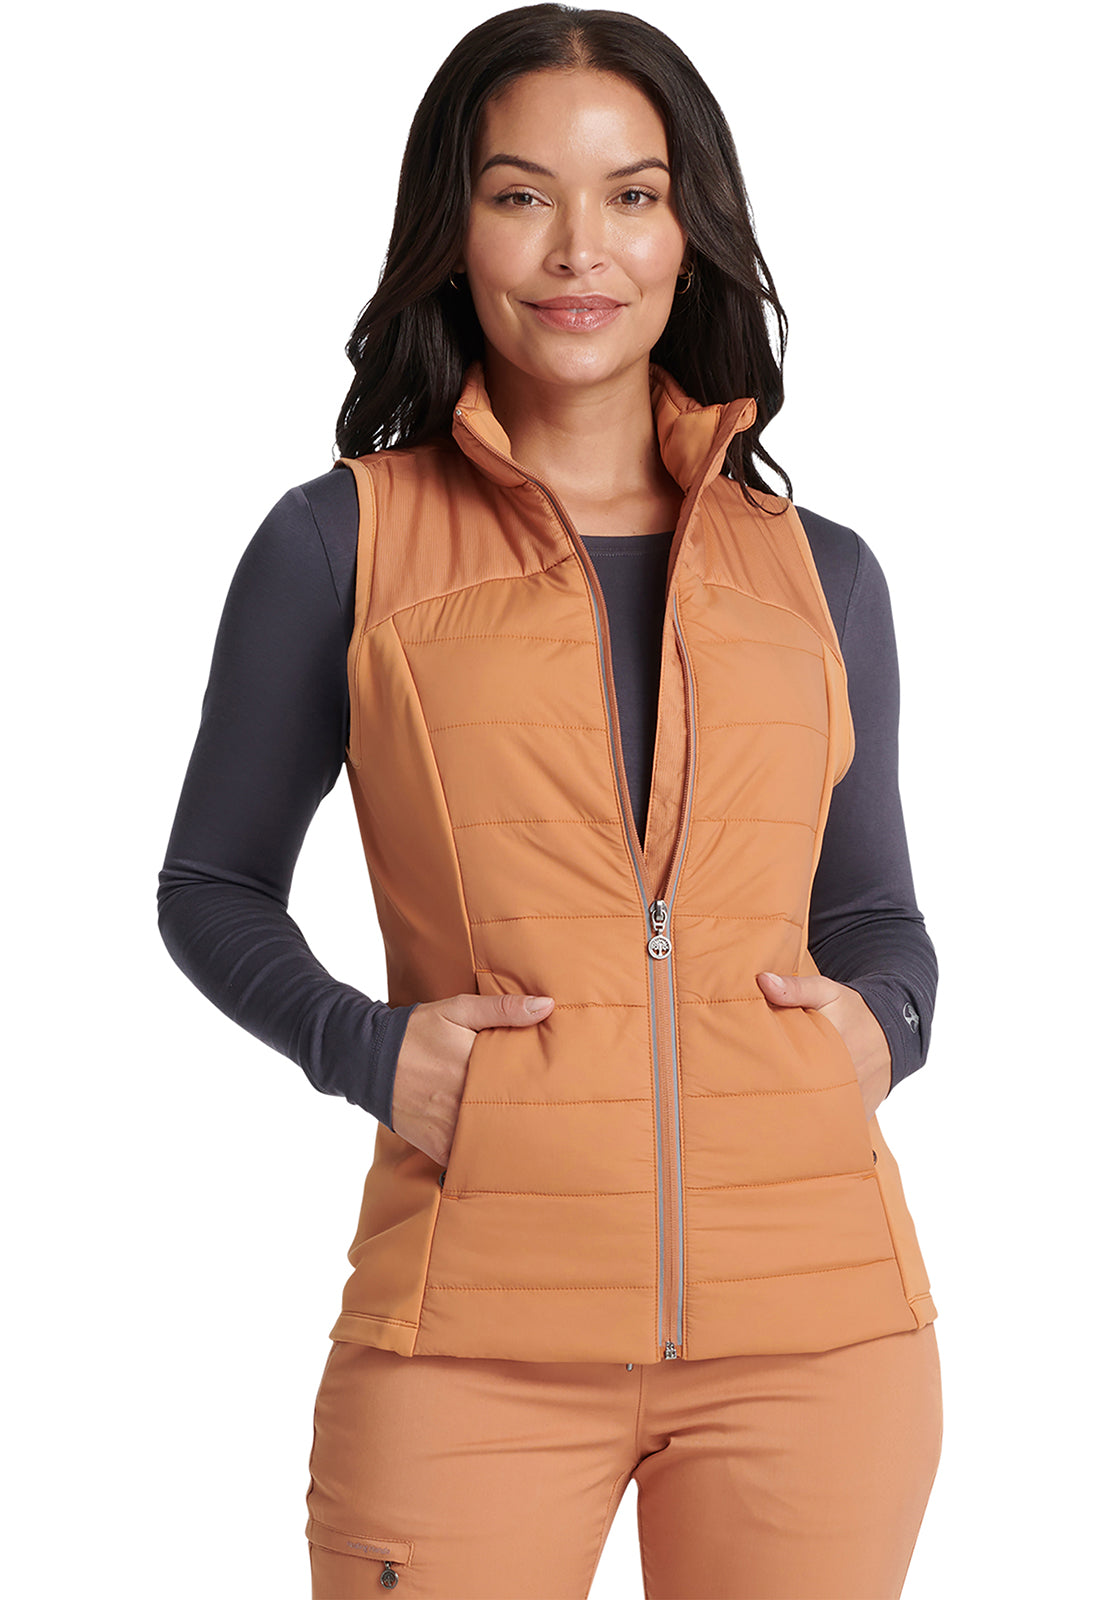 Healing Hands Limited Edition Quilted Vest (3 Colors)